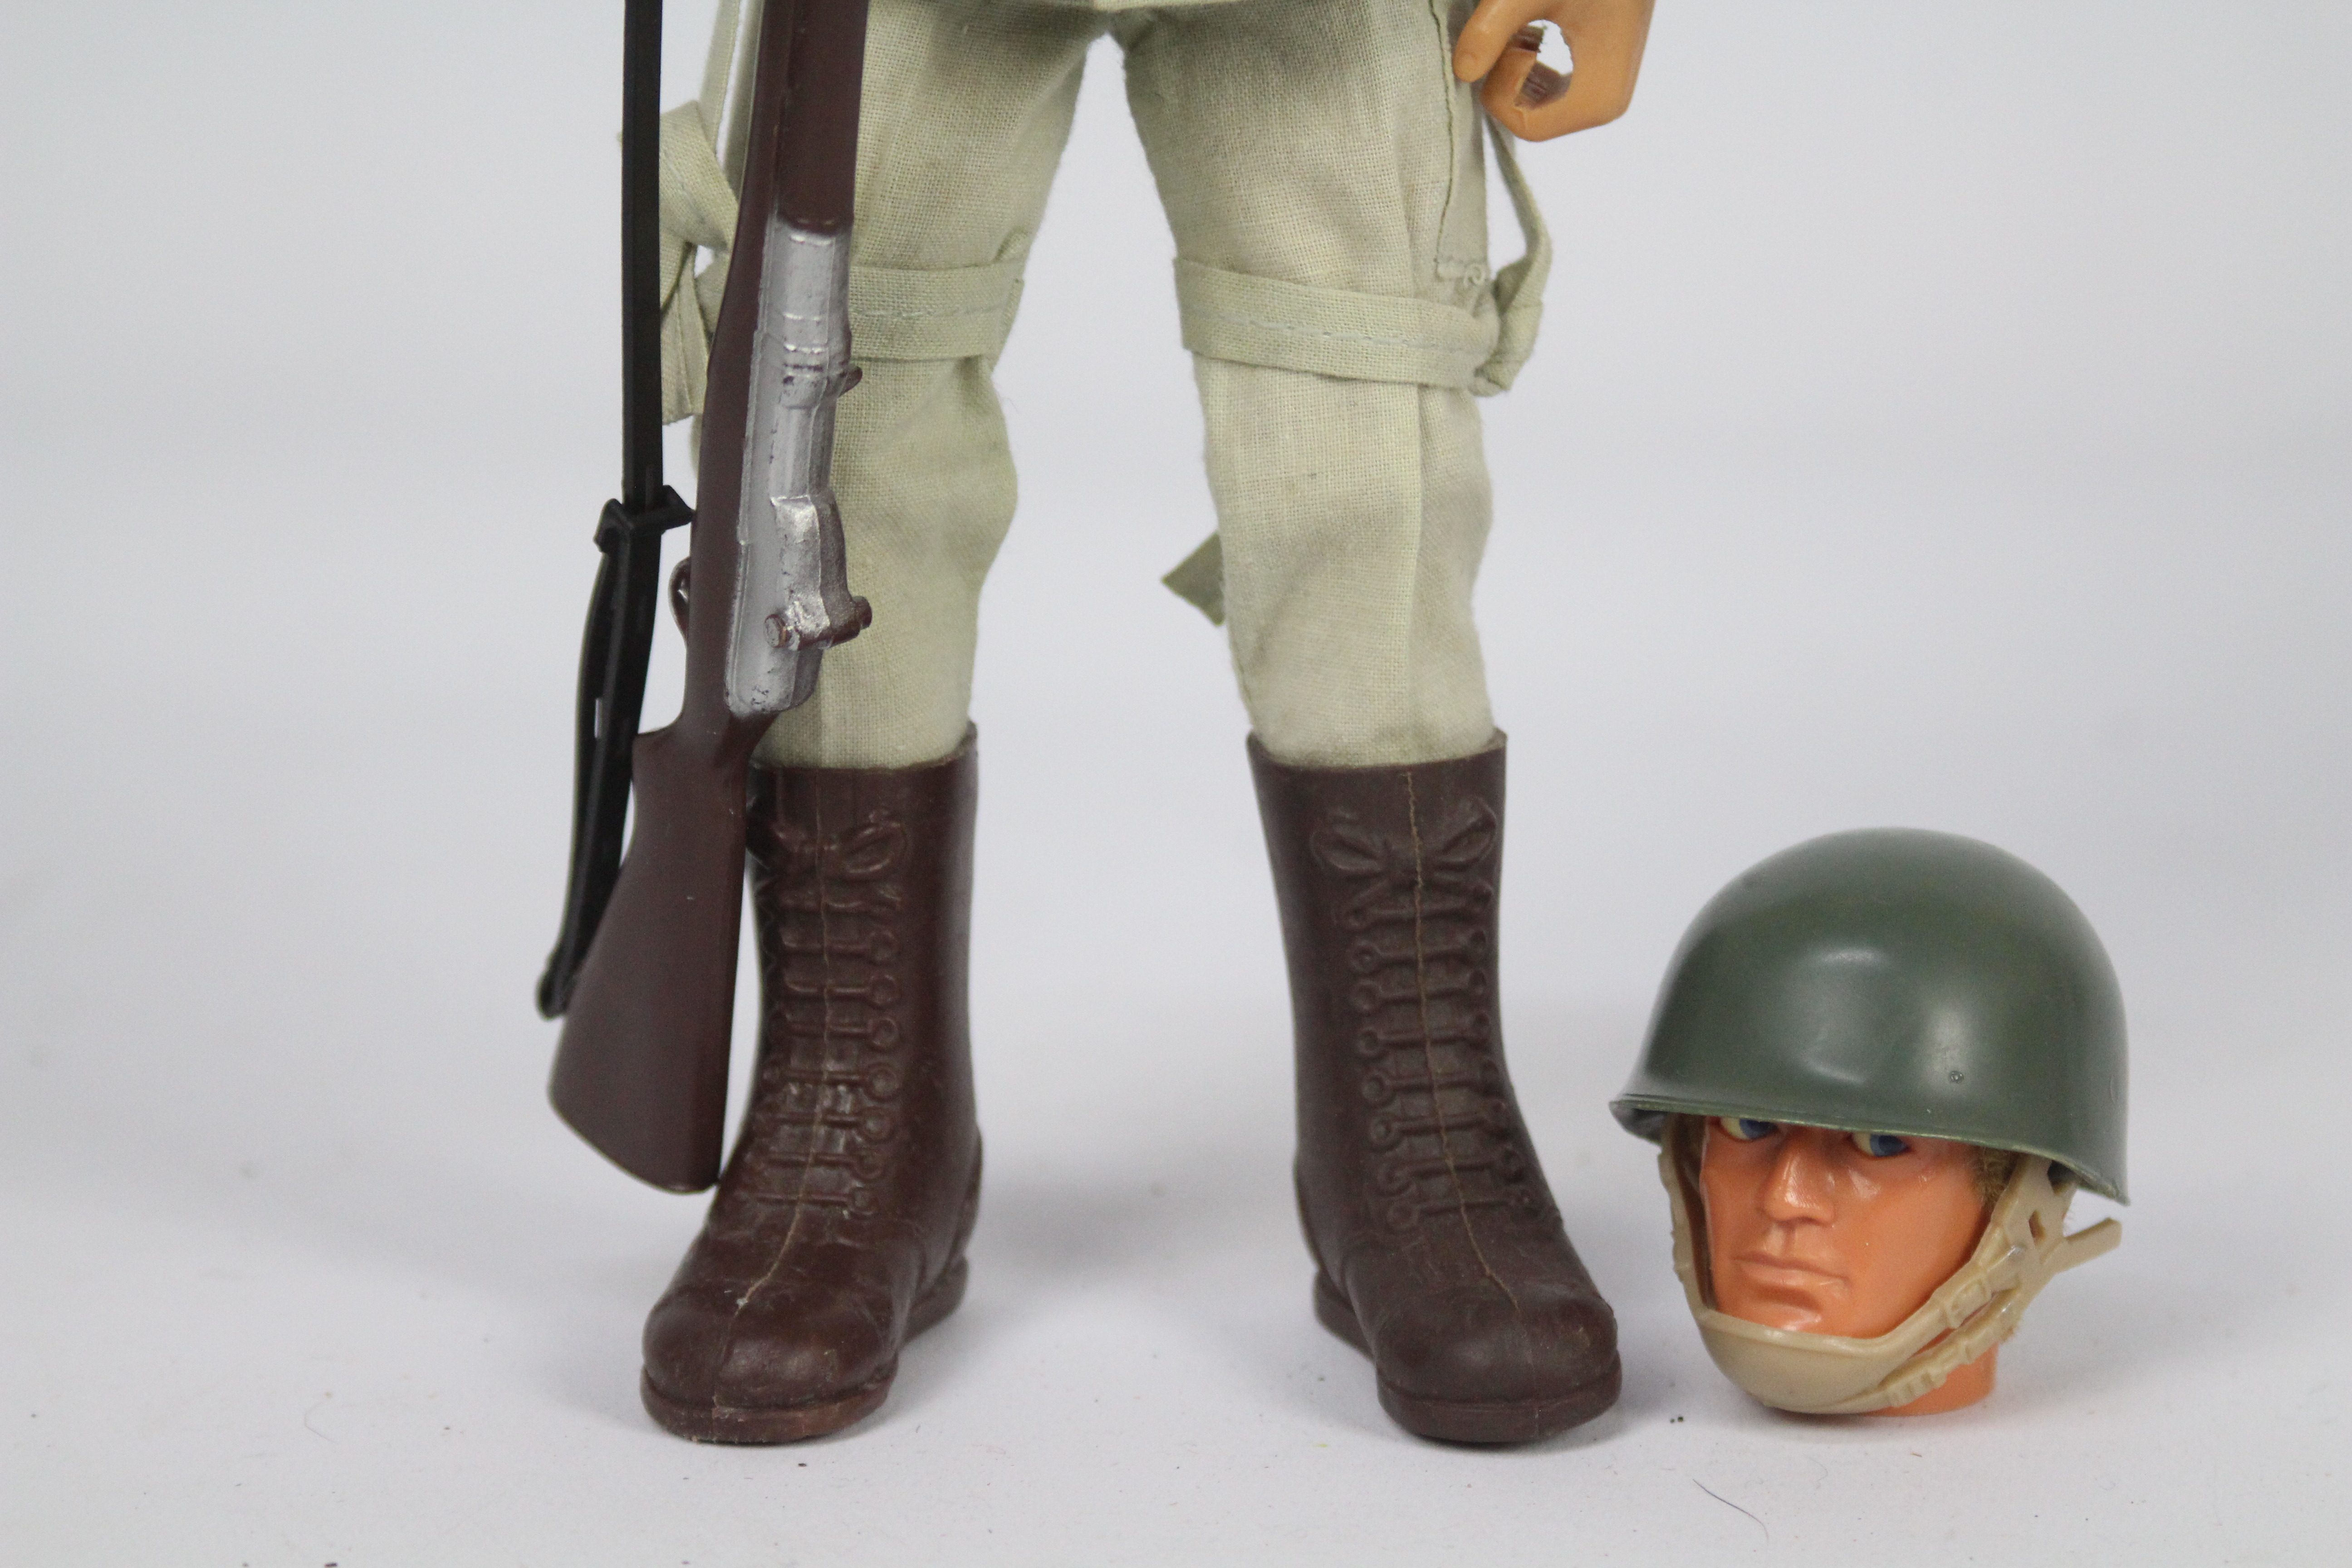 Palitoy, Action Man - A Palitoy Action Man figure in US Paratrooper outfit. - Image 5 of 7